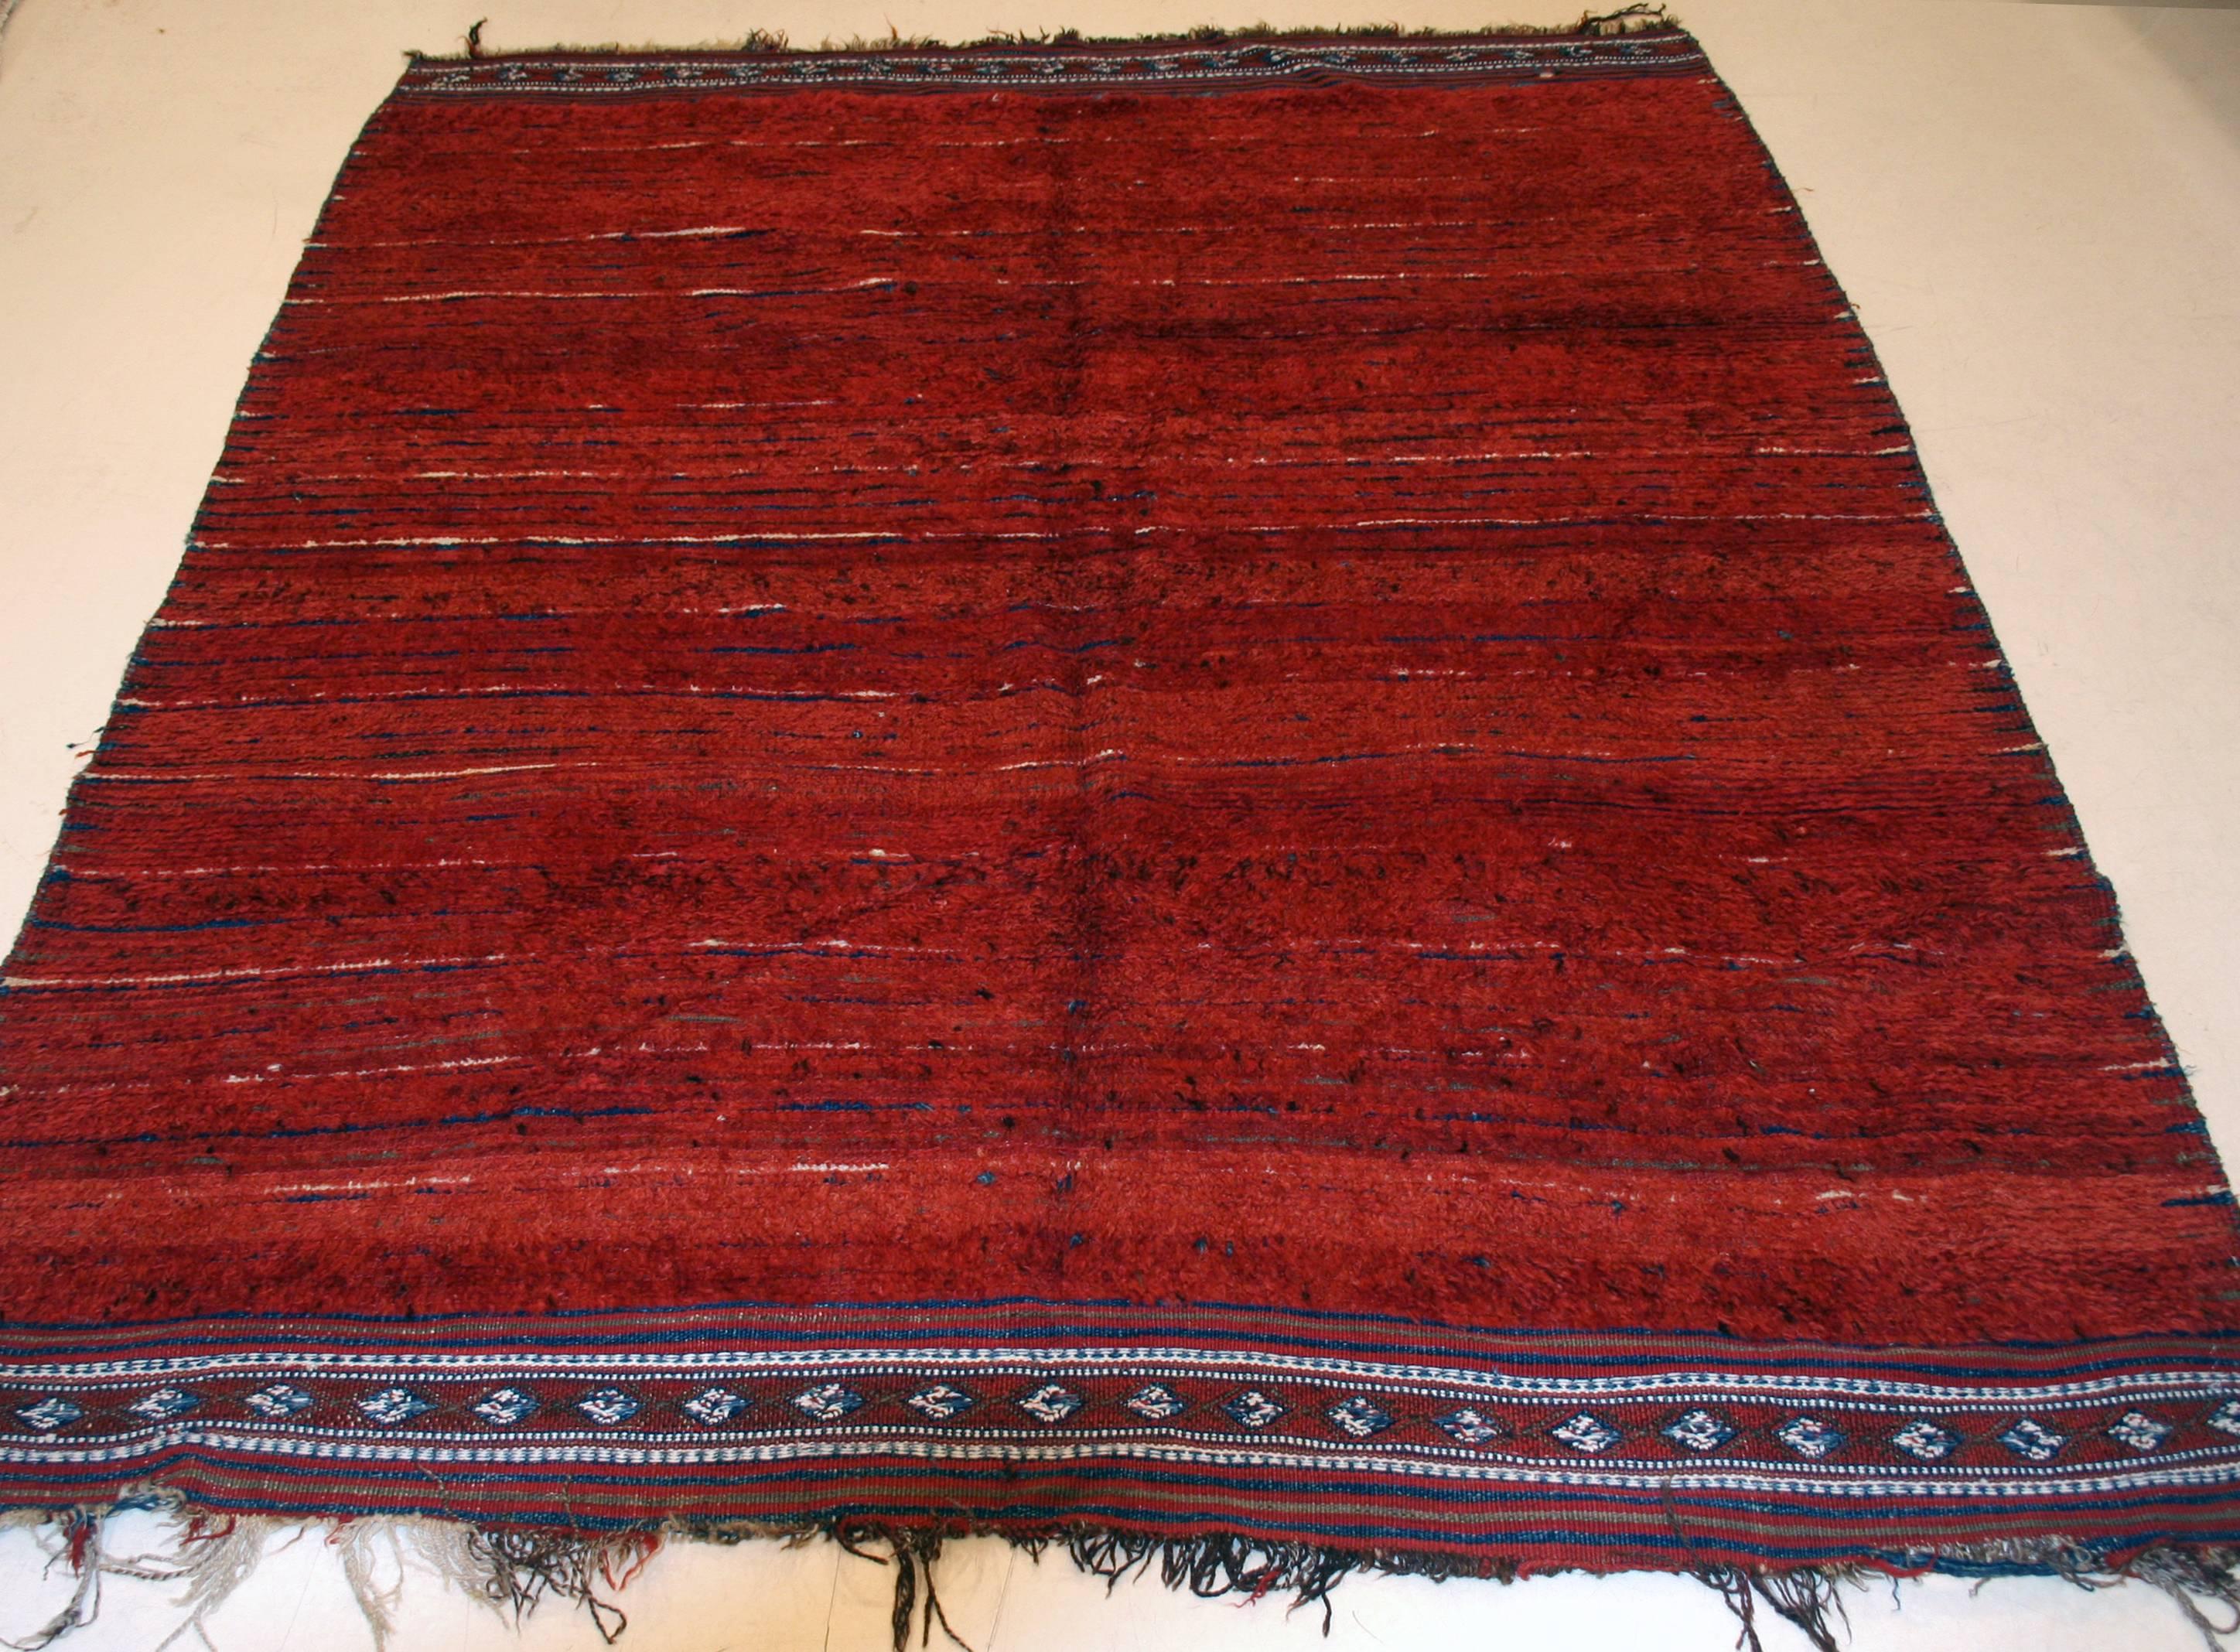 A very rare and unusual Uzbek rug from Central Asia distinguished by a warm and rich red open field background, a natural color extracted from the madder plant. This background is embellished by the striped computed wefts, the colors of which